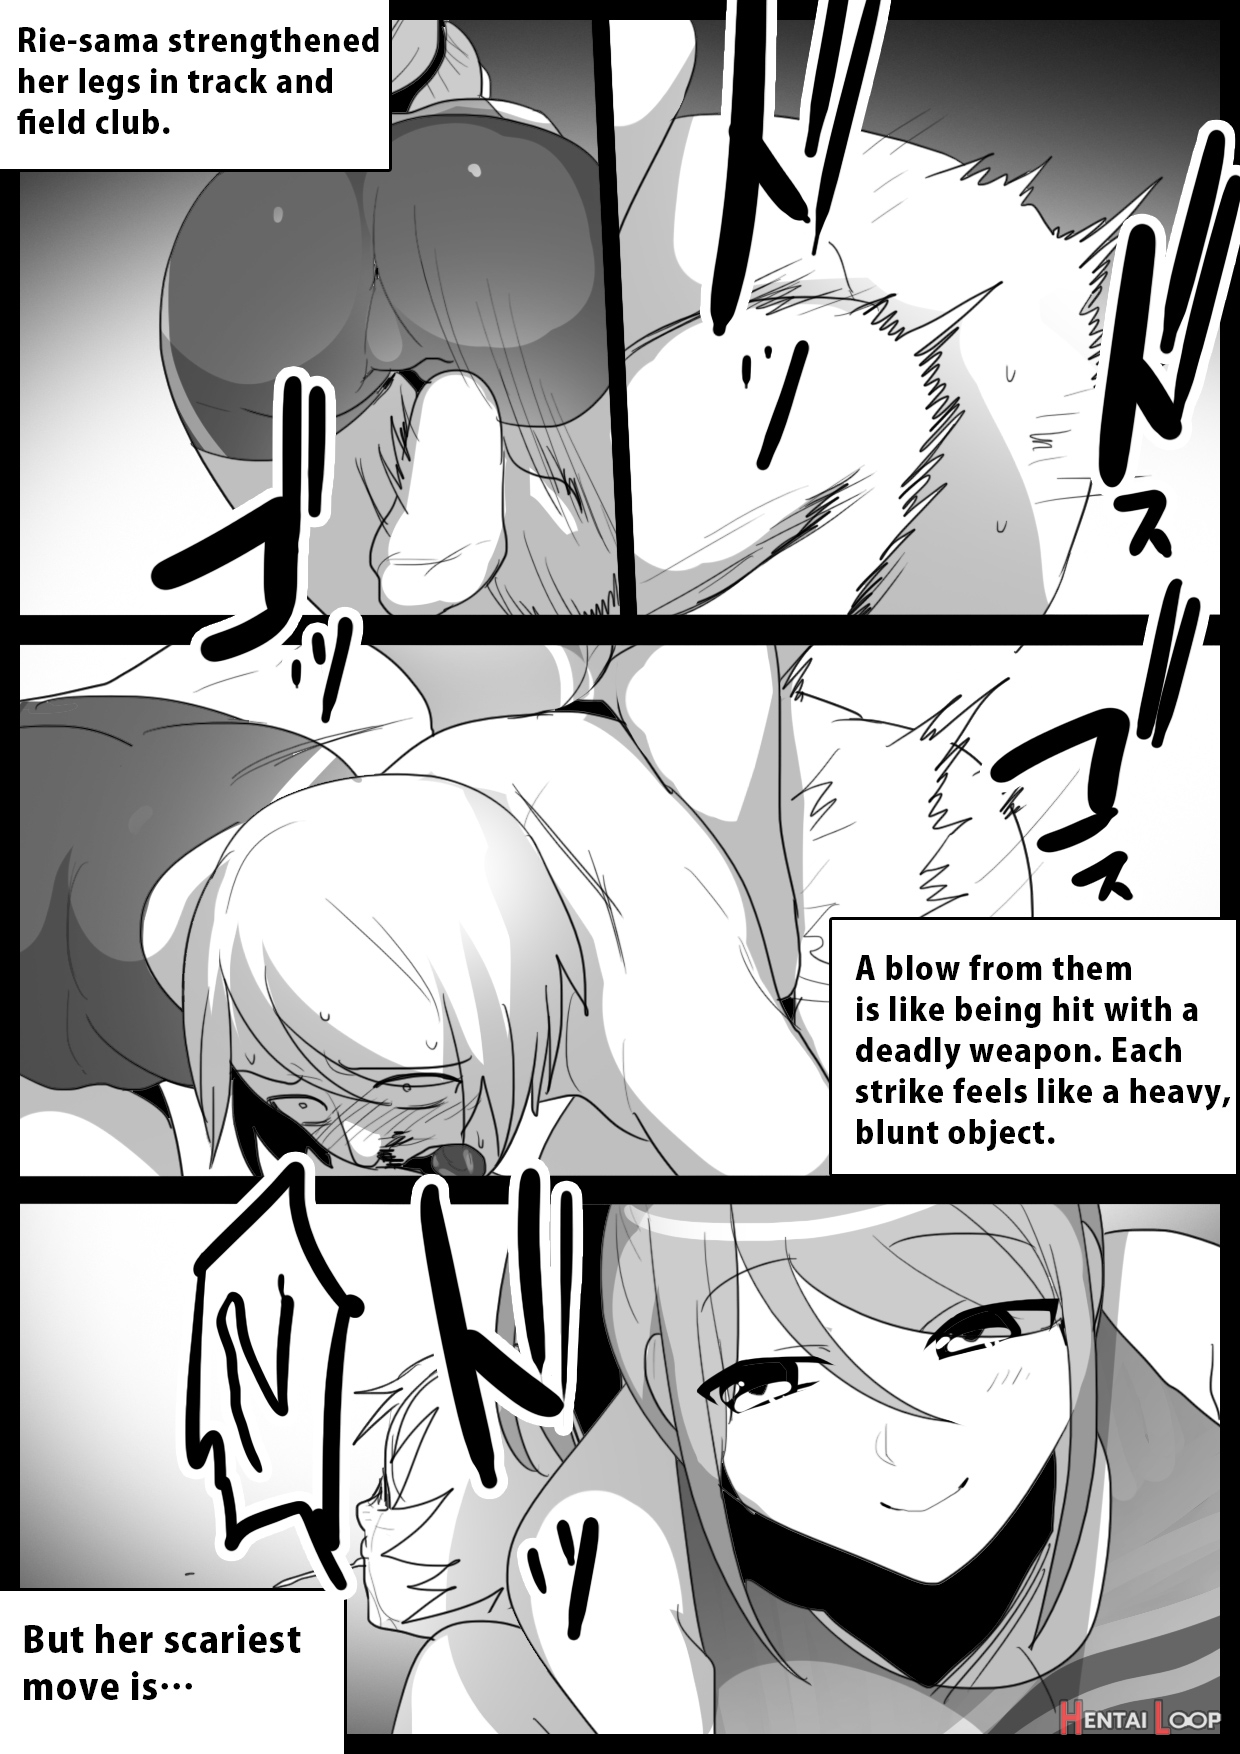 Spin-off Of Girls Beat By Rie page 5